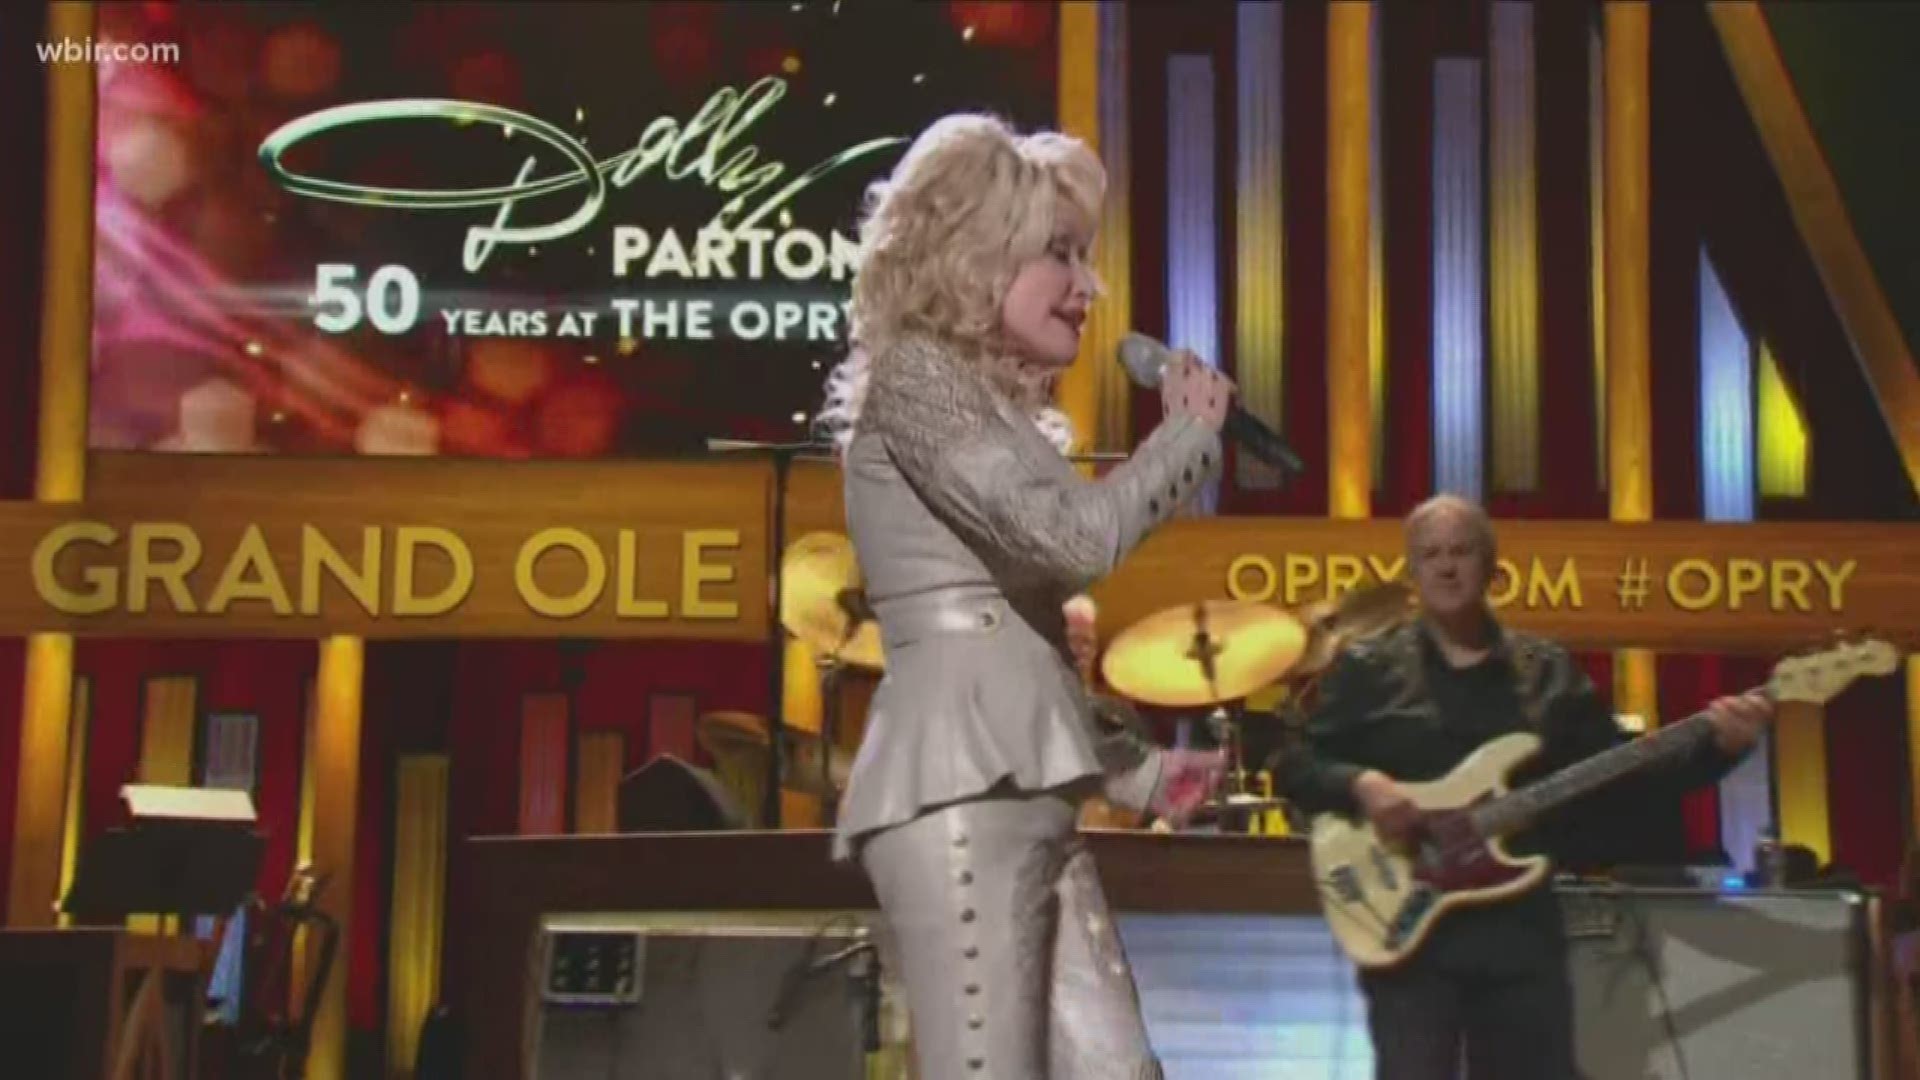 All week long, the Opry celebrated "Dolly Week" with a performance by the country queen herself for the grand finale.